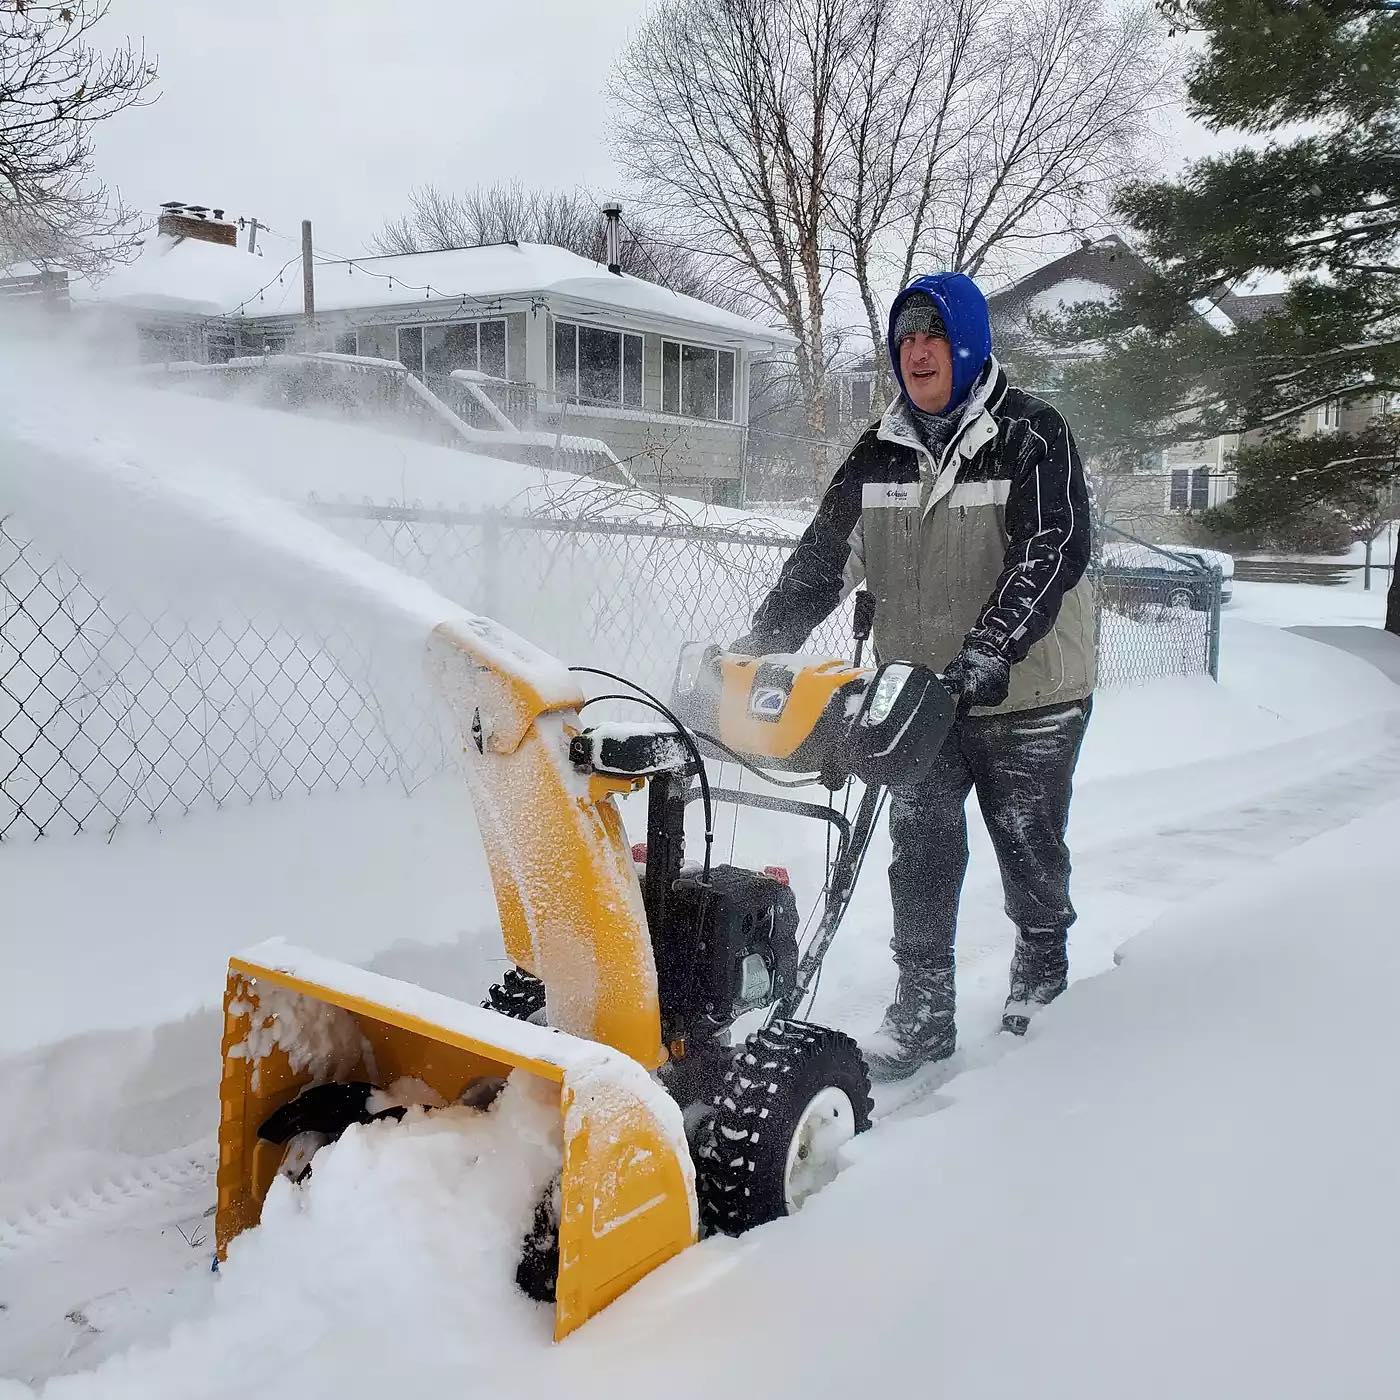 Every year, north Minneapolis resident Paul Skrbec invites neighbors with snowblowers to join his “snowblower challenge:” Go a little farther and clear sidewalks for the whole block.Skrbec is 52 and retired but said that every winter since 1994, barring some years living out-of-state, he has removed snow for neighbors. “The idea is for people who do have that ability to do so to be kind to their neighbors and to help them out,” he said. “I've got a couple of neighbors that are elderly, and they maybe can't shovel very well, but yet the street needs to be accessible for people. And so this is a kind of an effort to have people do that.”Read more about Paul via the @mprnews story via link in bio! — from Instagram